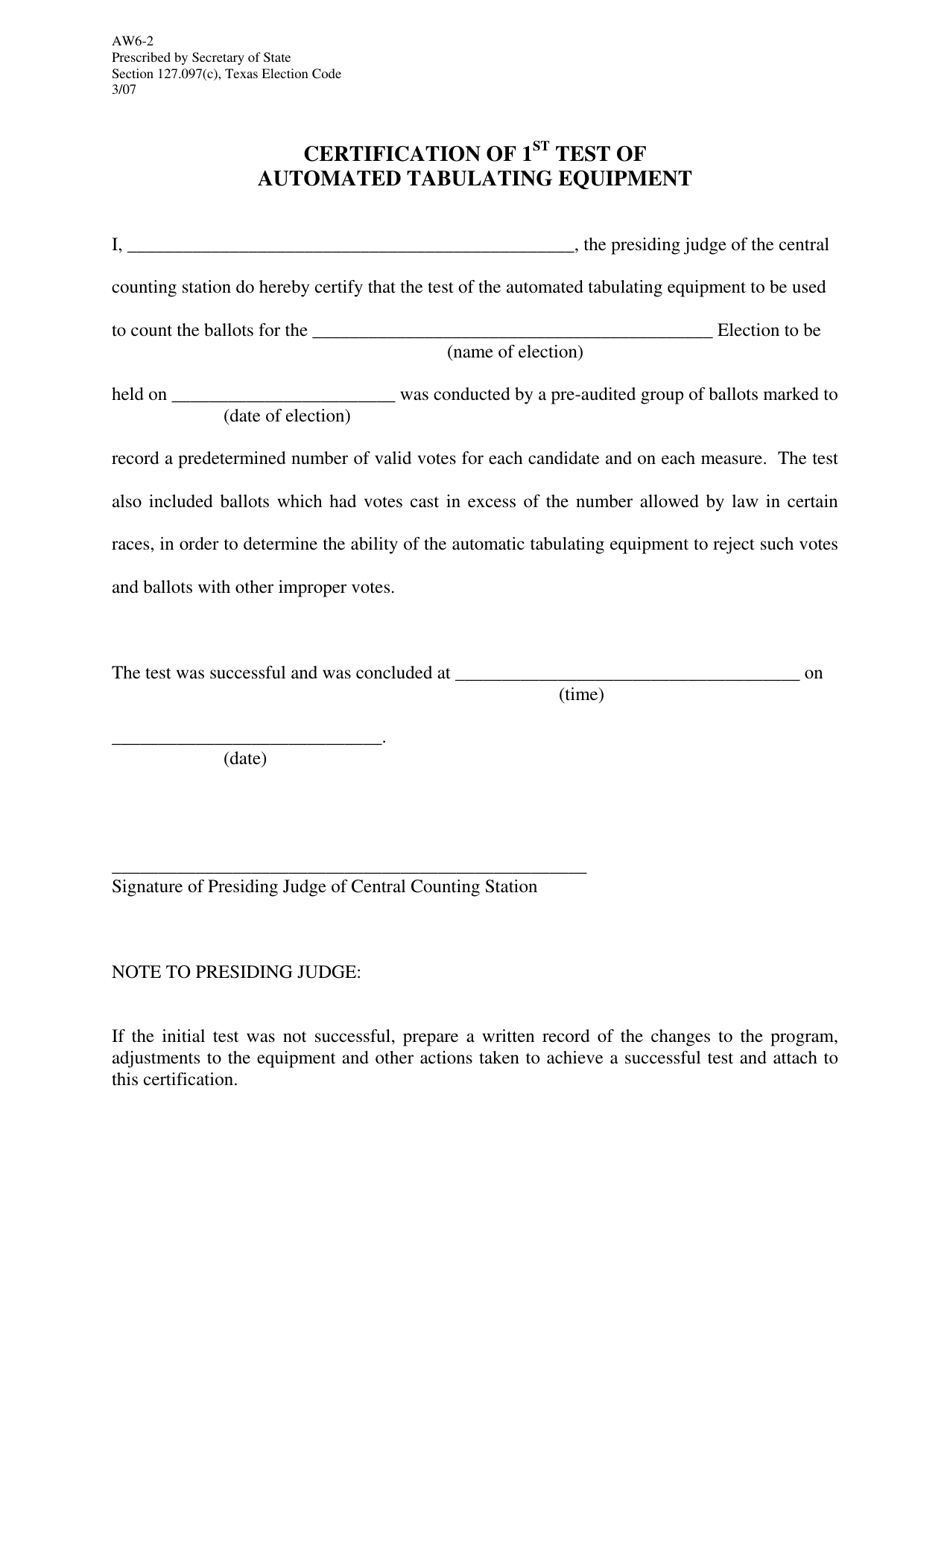 Form AW6-2 Certification of 1st Test of Automated Tabulating Equipment - Texas, Page 1